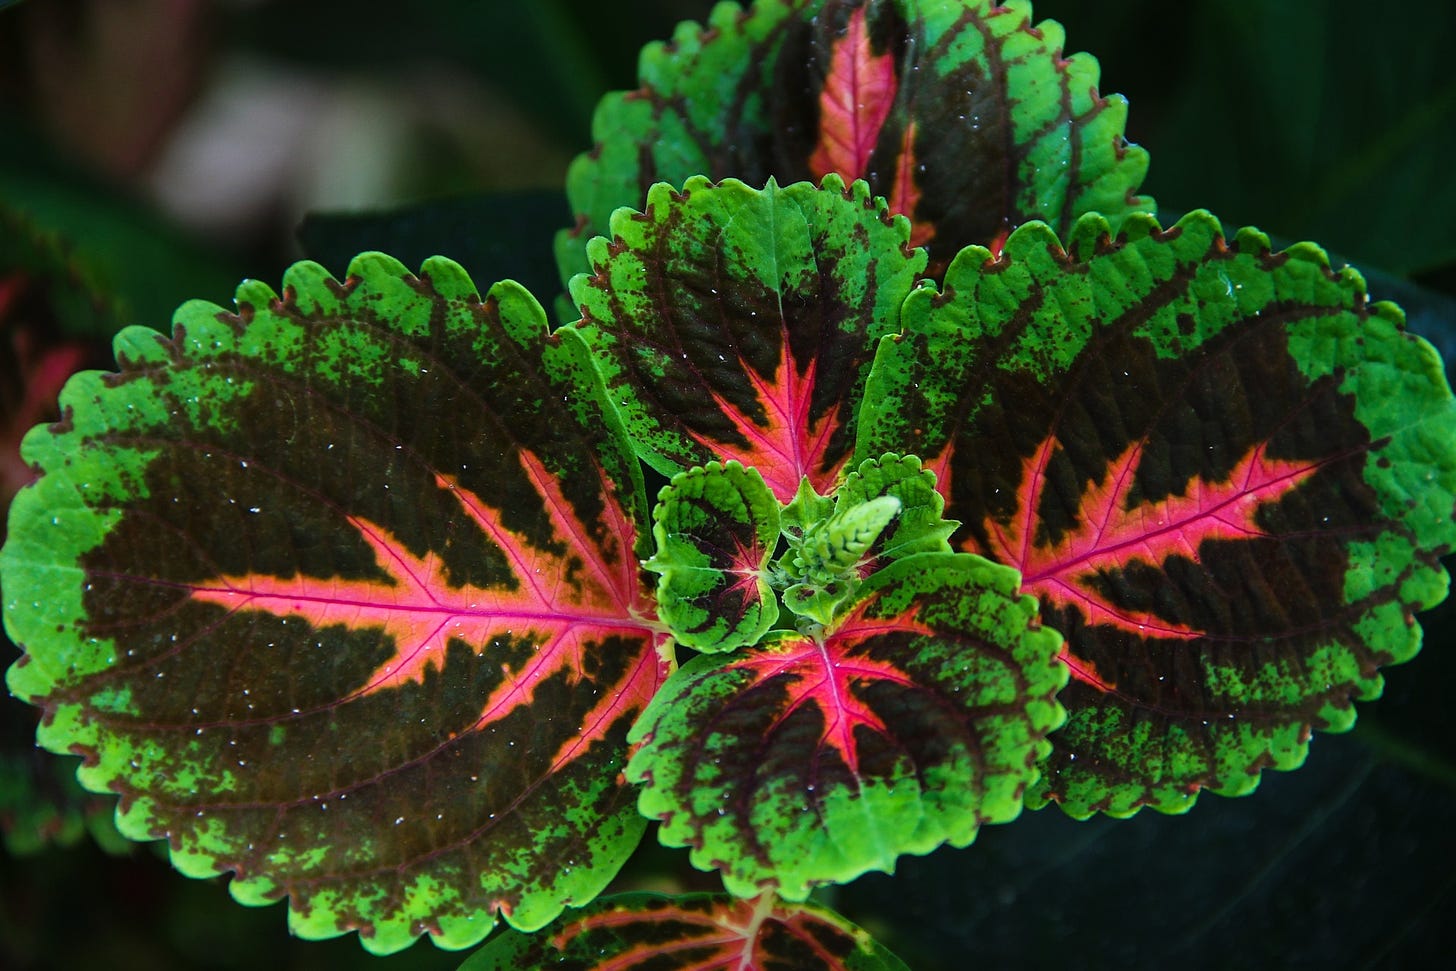 A multi colored nettle house plant, shades of gree with pink radiating from the center, shows new life.